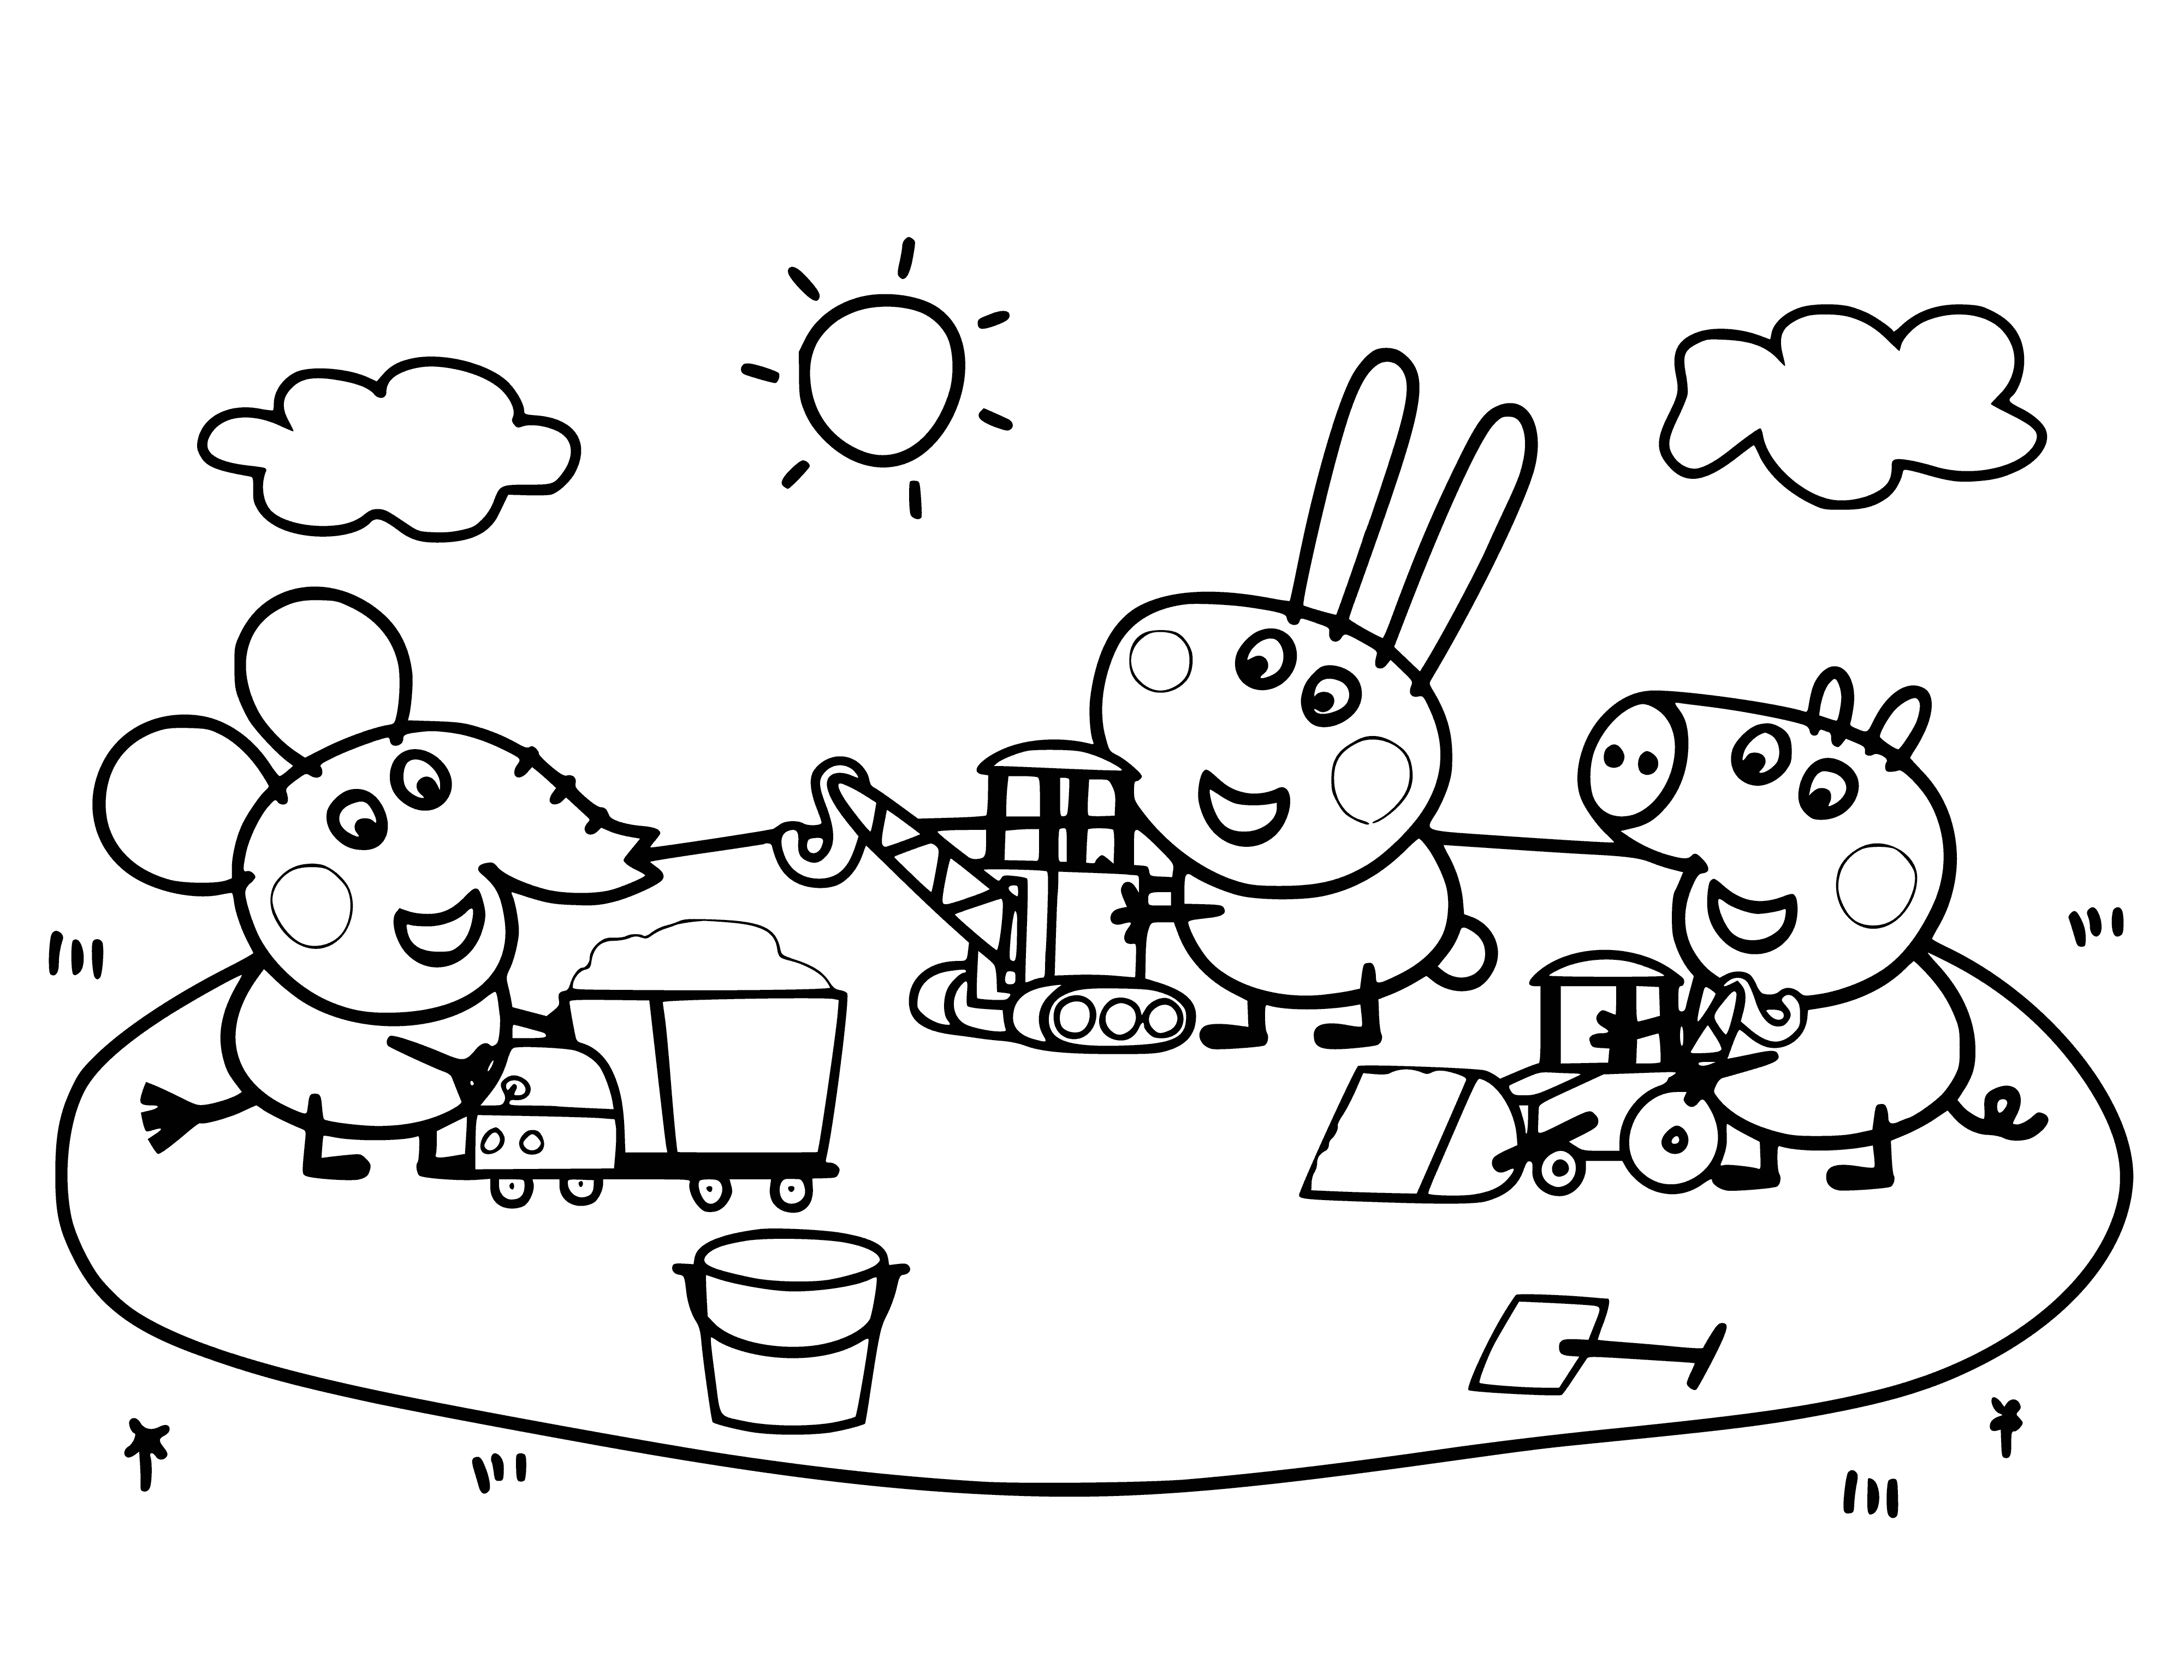 Baby Elephant Edmont, Richard Rabbit and George Pig coloring page